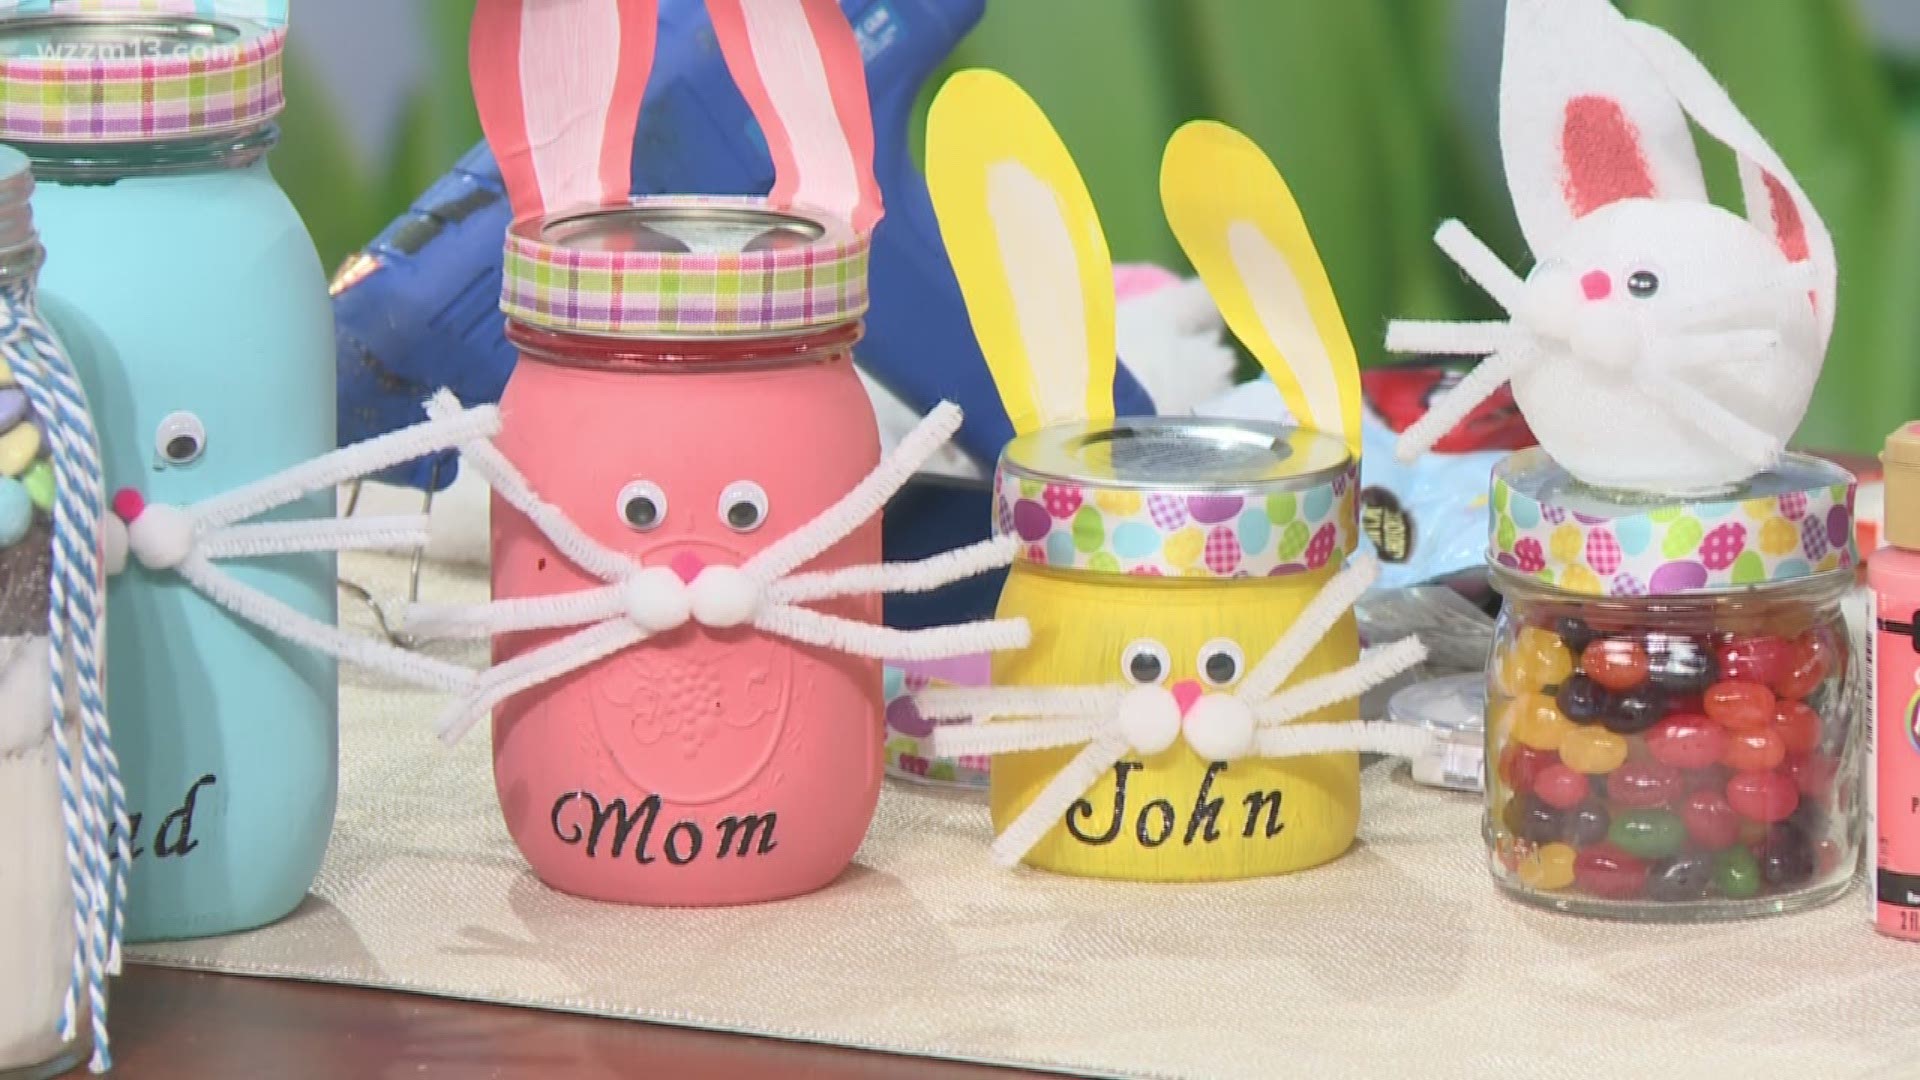 Want to give your home a little touch of Easter?  Craft expert Adeina Anderson stopped by to show us several easy craft projects.